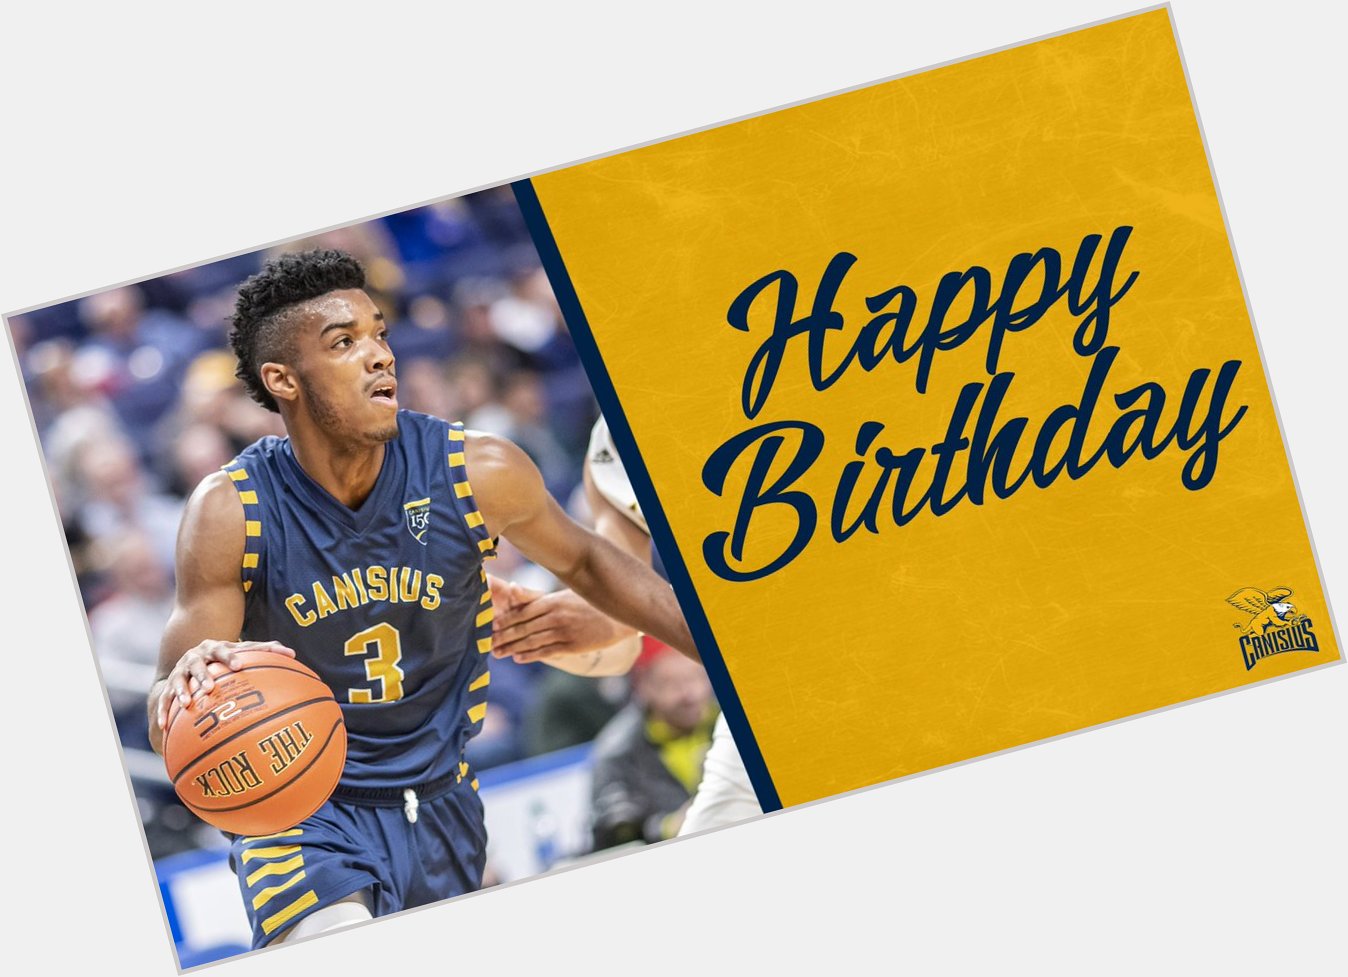 Happy Birthday wishes going out to No. 3  - guard Jordan Henderson. 